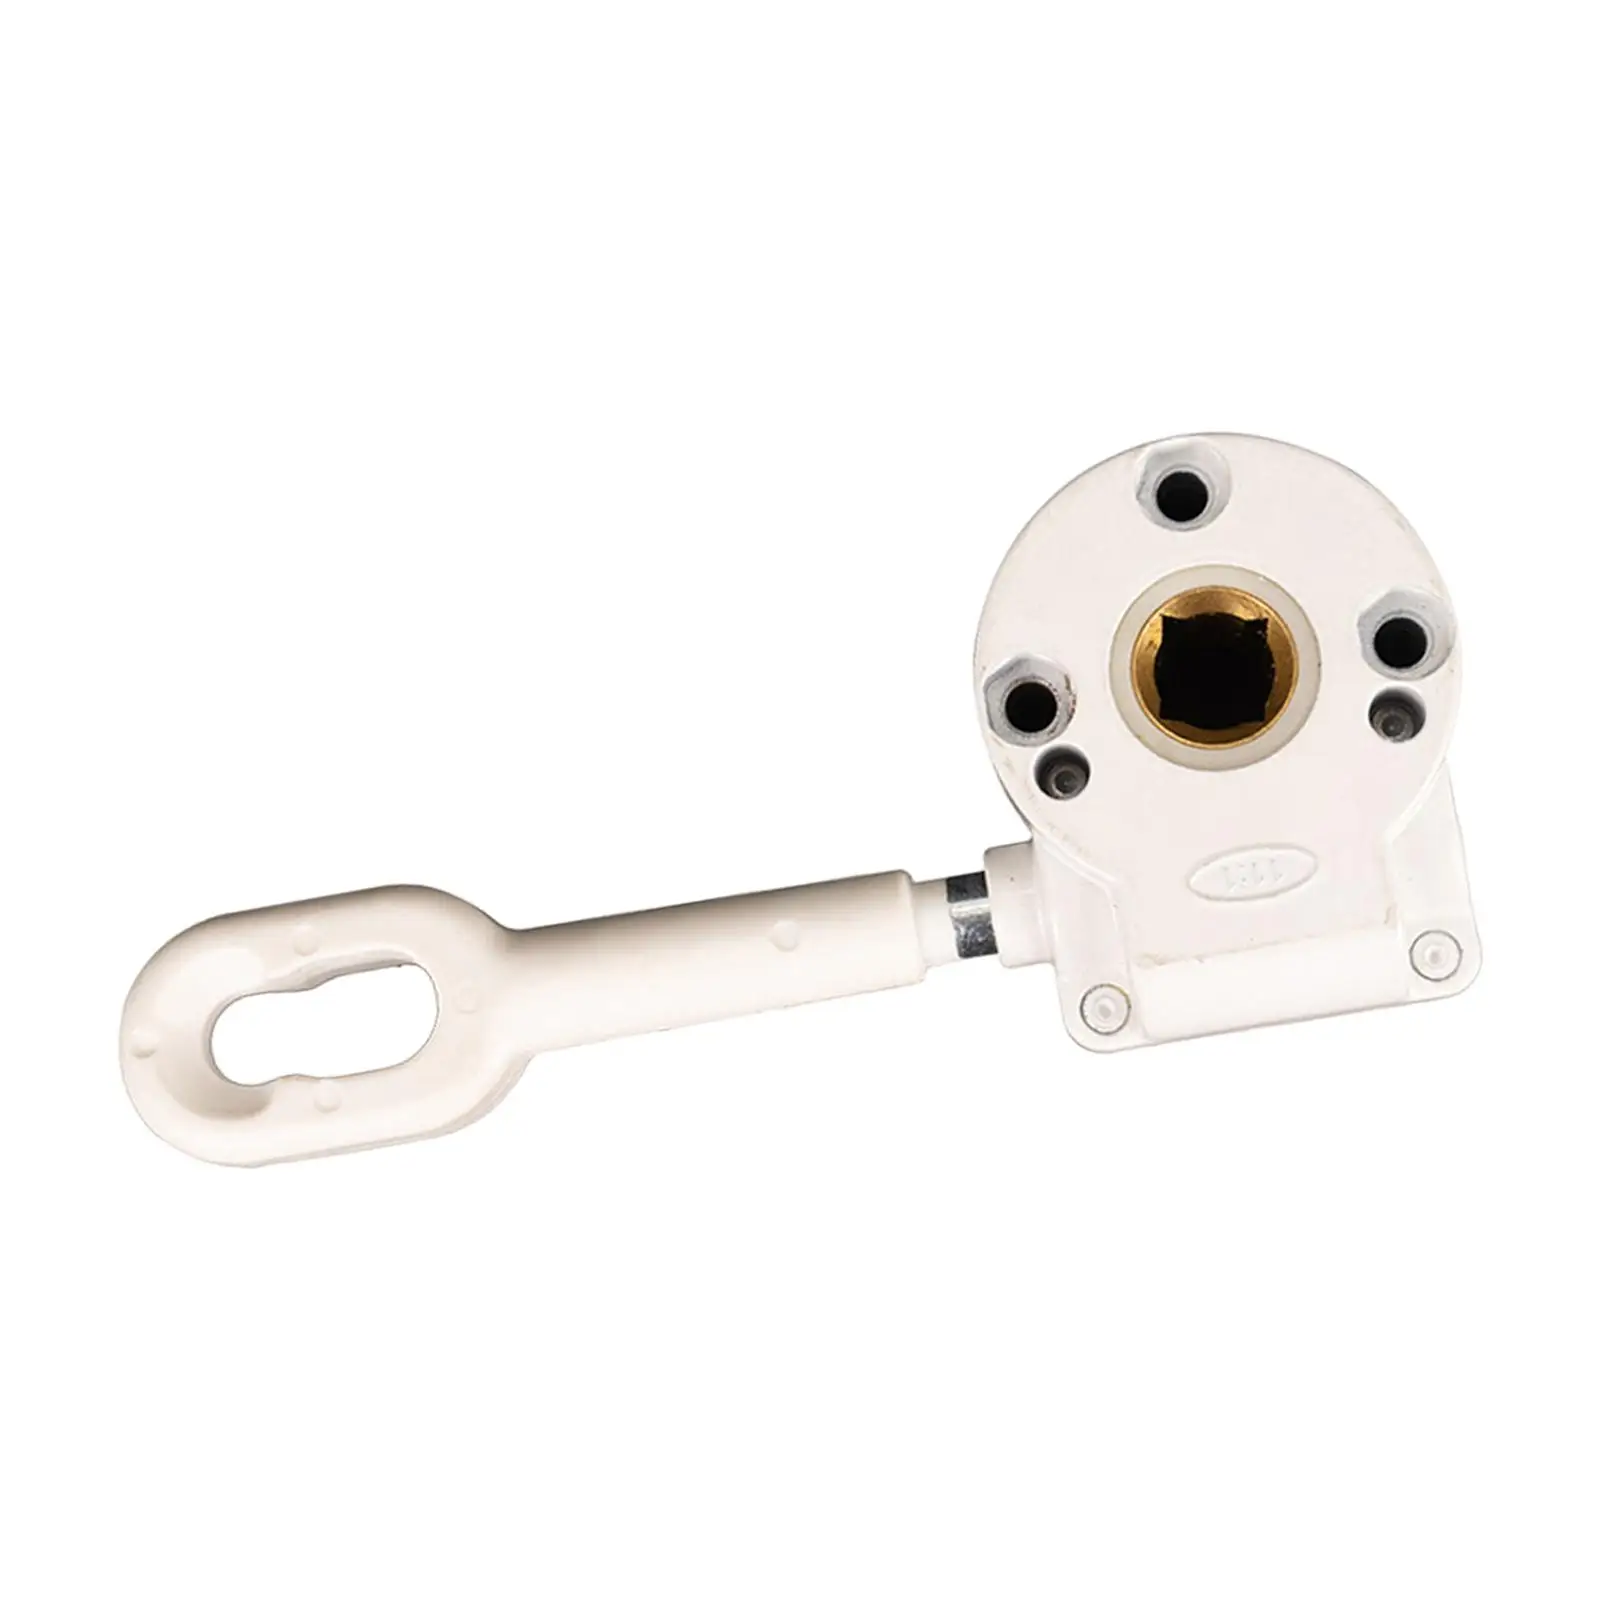 Outdoor Awning Crank Gearbox Easily Install Lightweight Hardware Parts